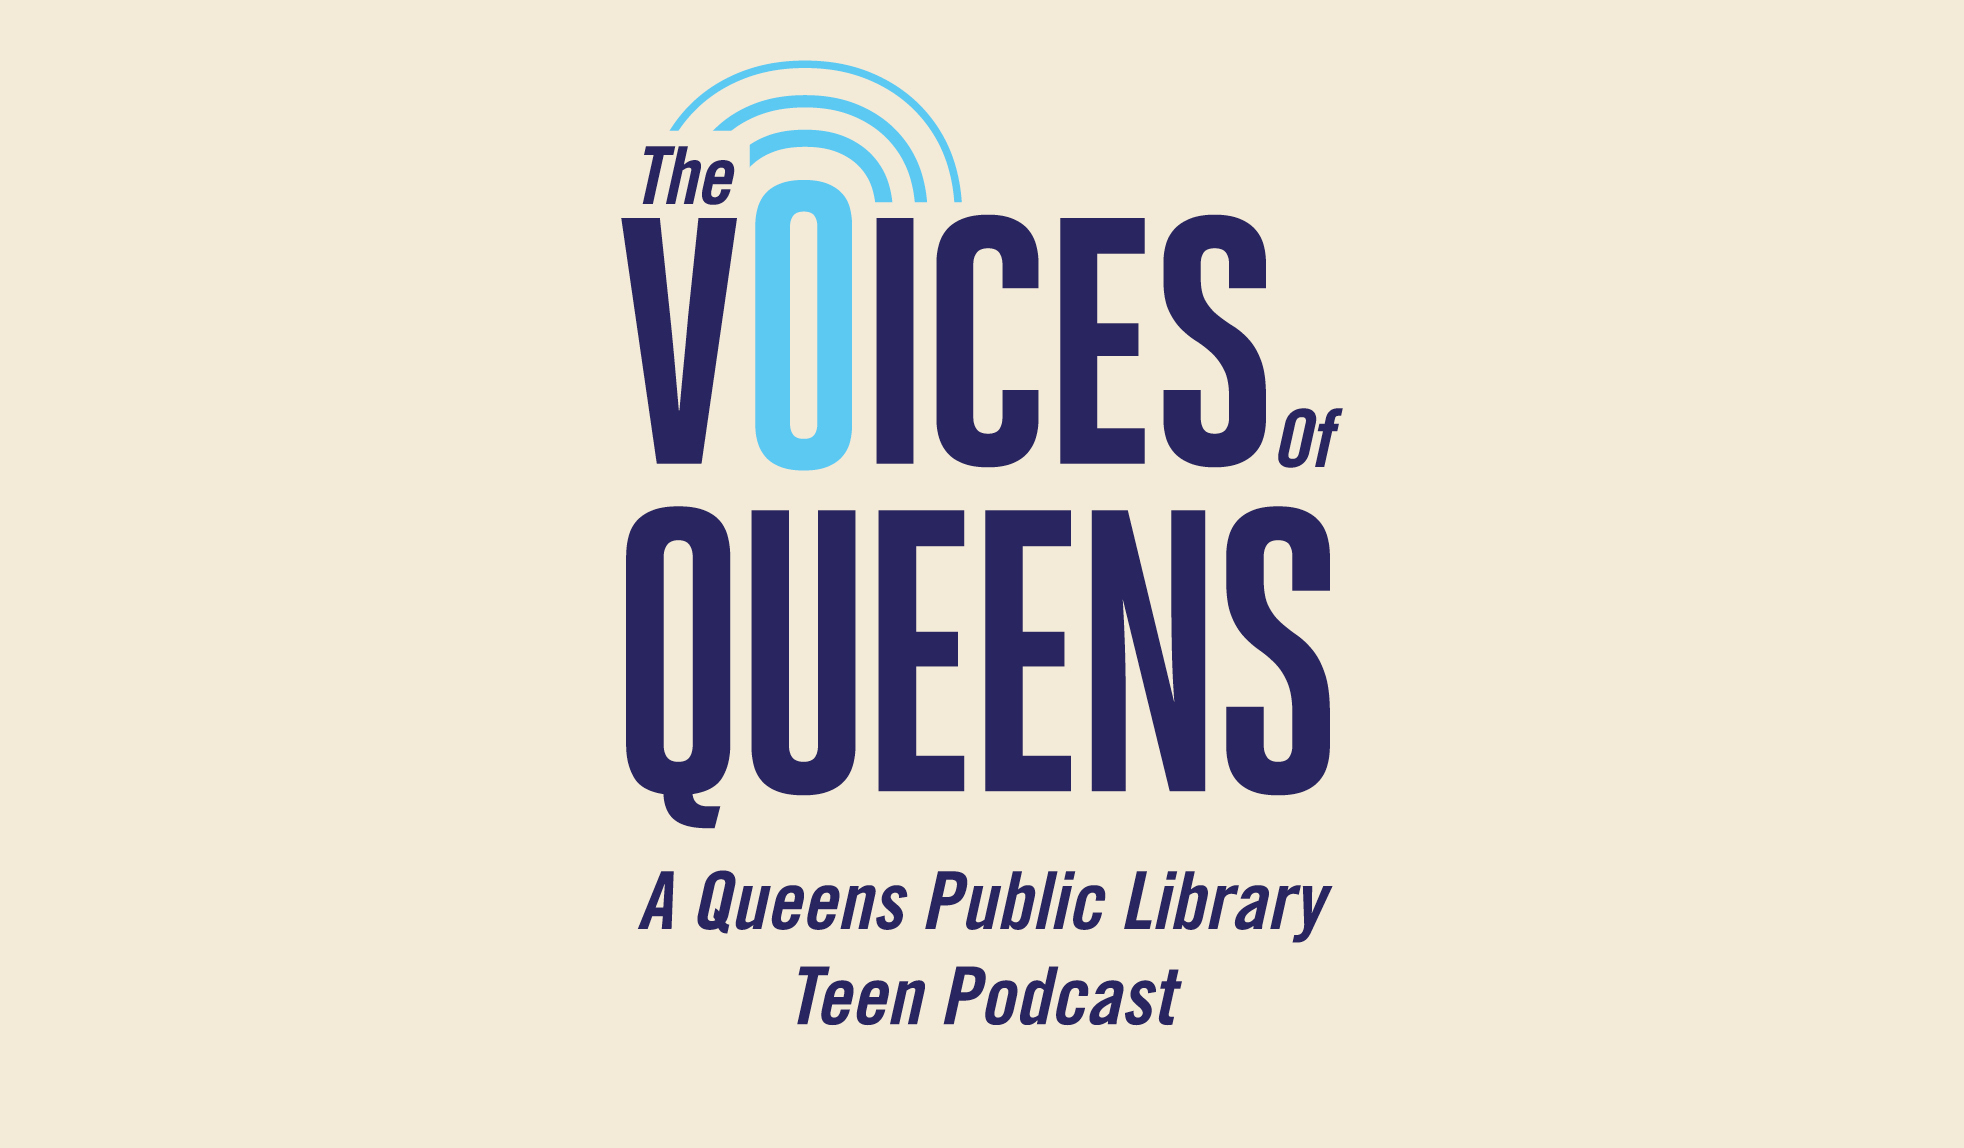 Teens: Learn how to produce your own podcasts and social media content in this free workshop!